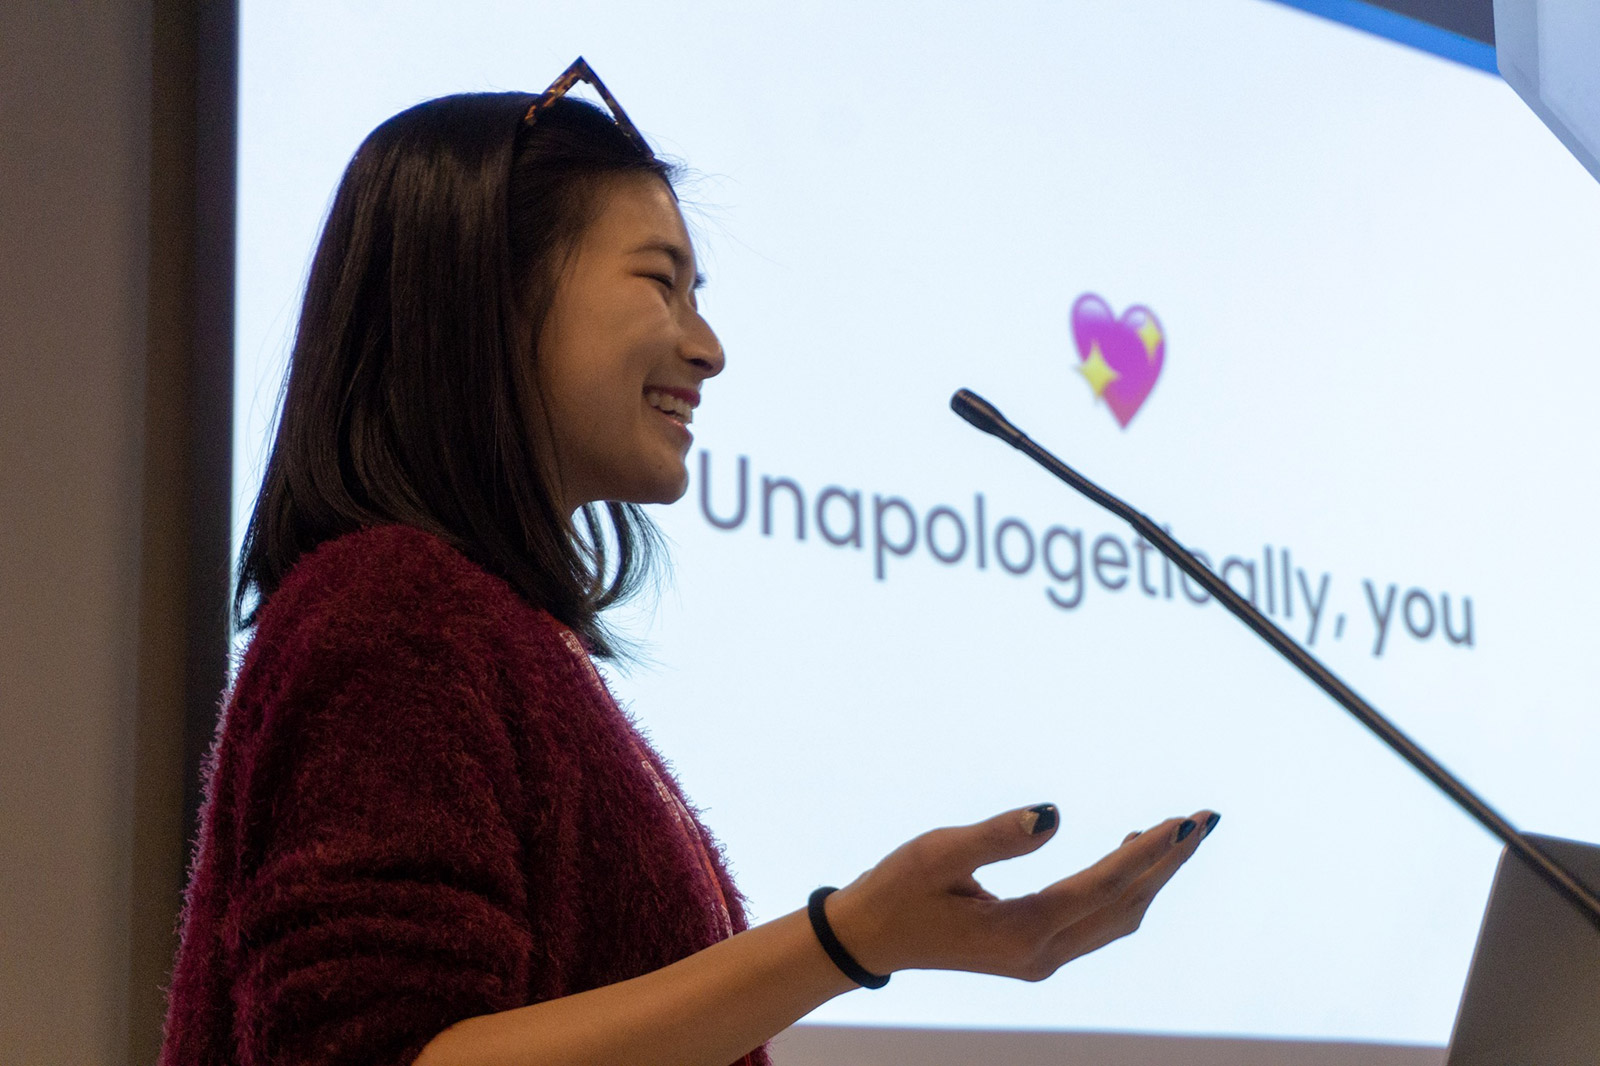 A woman with her palm upturned, in front of a screen reading “Unapologetically, you”